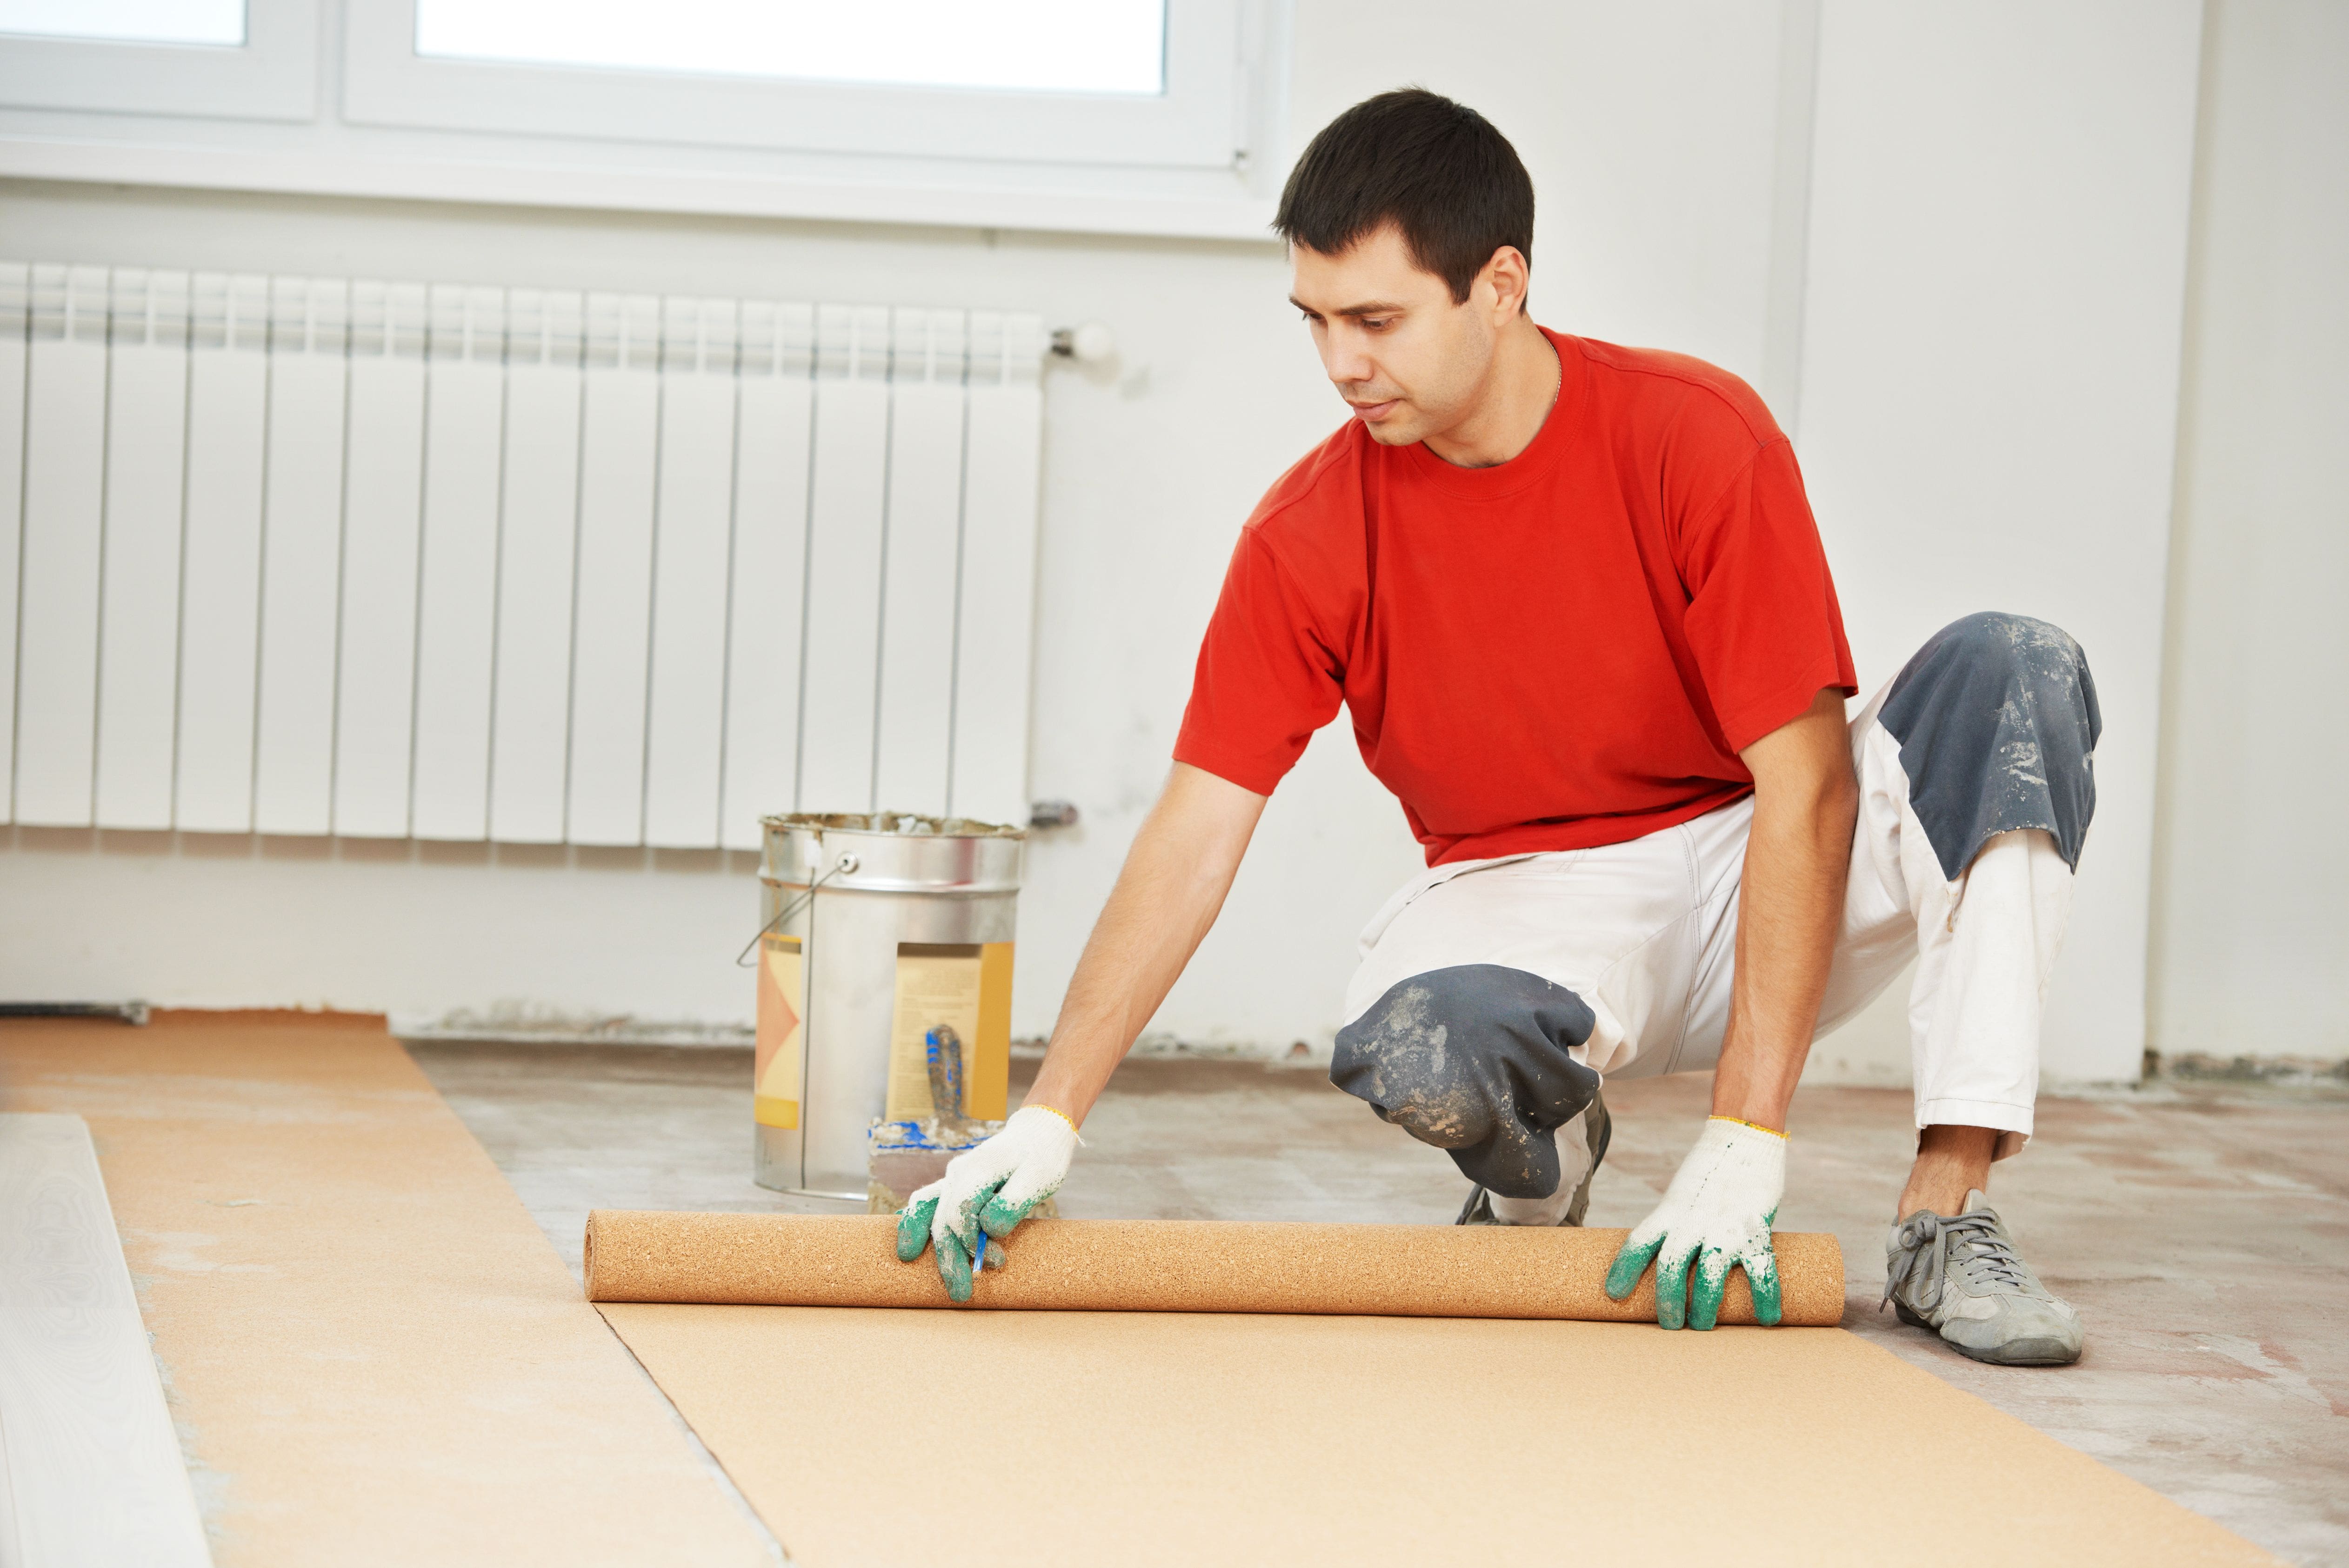 5 Things To Look At When Choosing Your Contract Flooring Solution